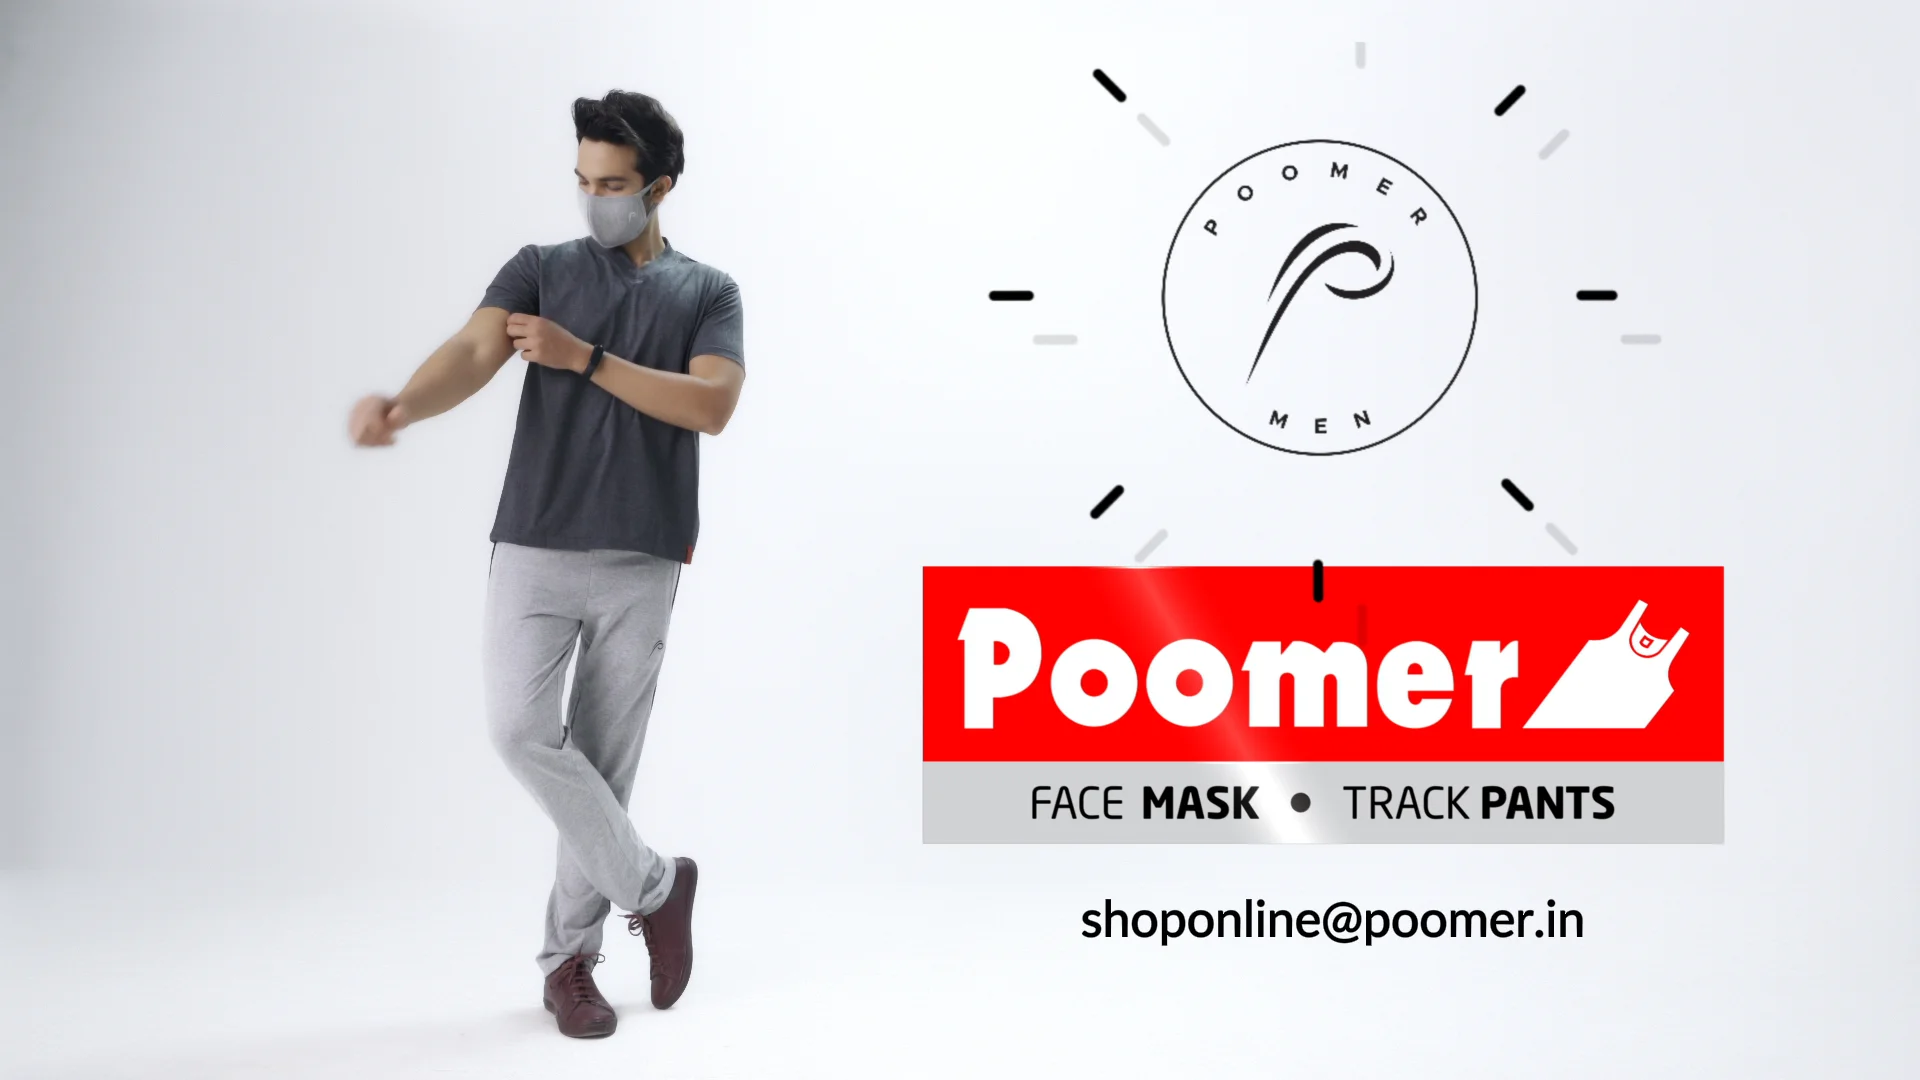 Poomer face mask and track pants ad by PENWORKS AD AGENCY 